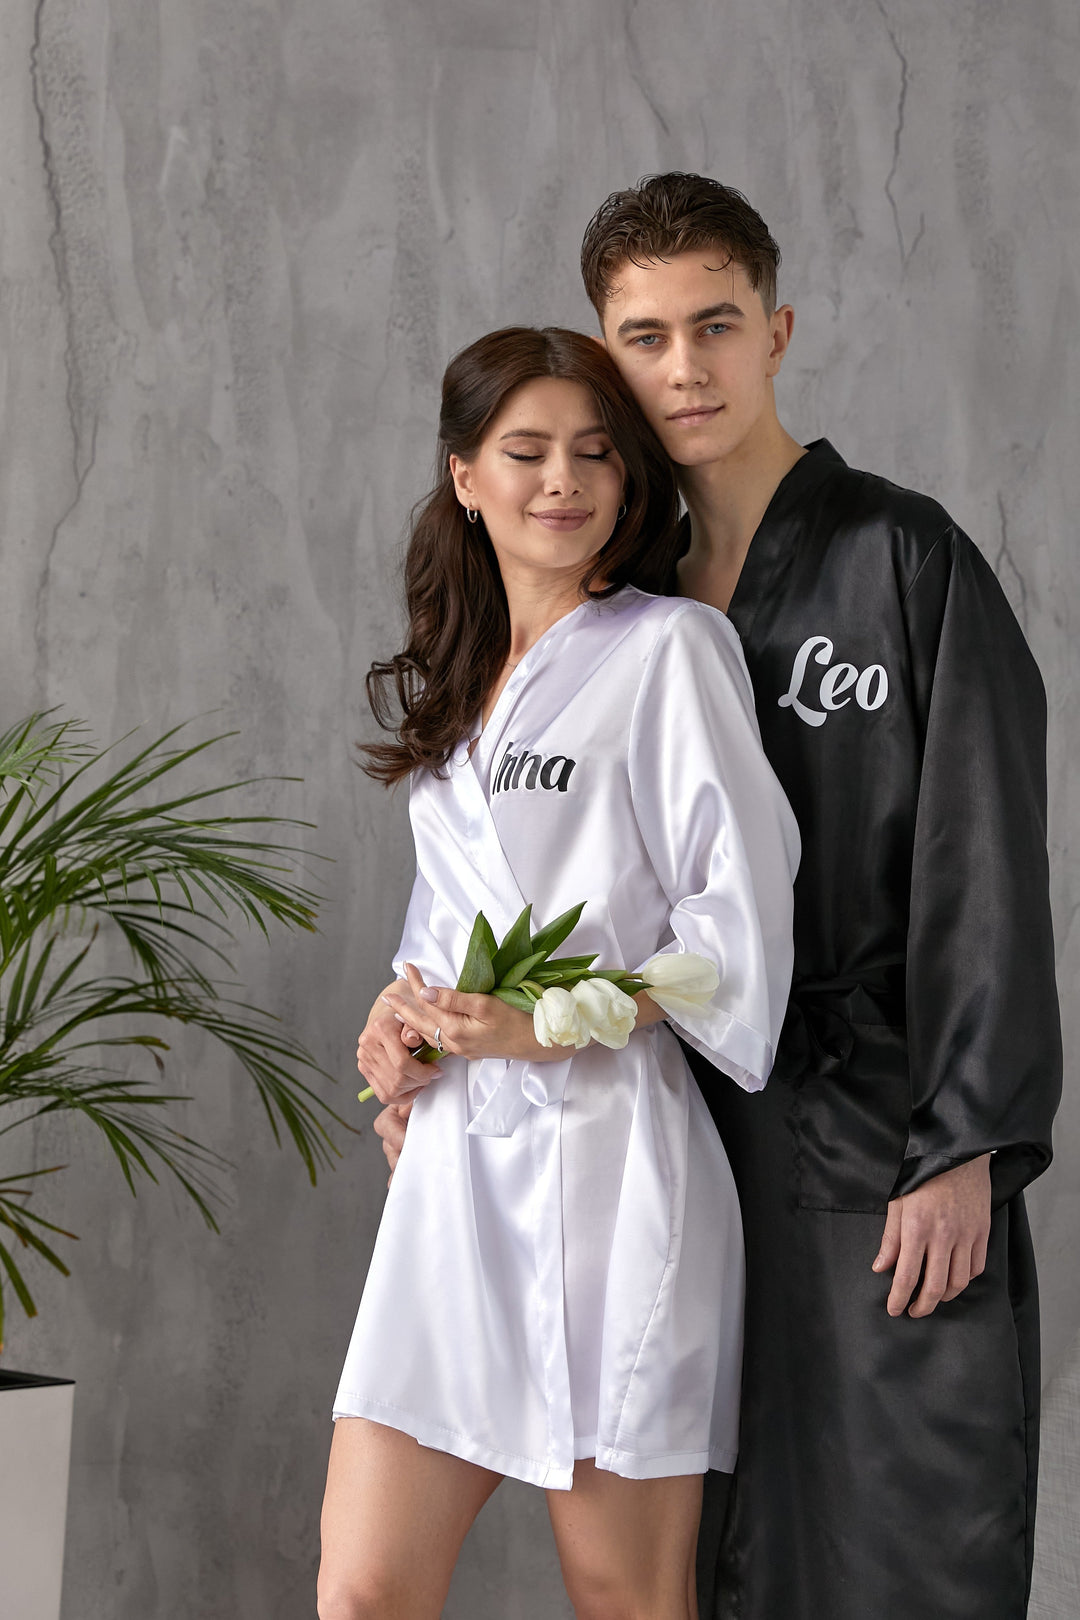 Matching Satin Robes for Couple